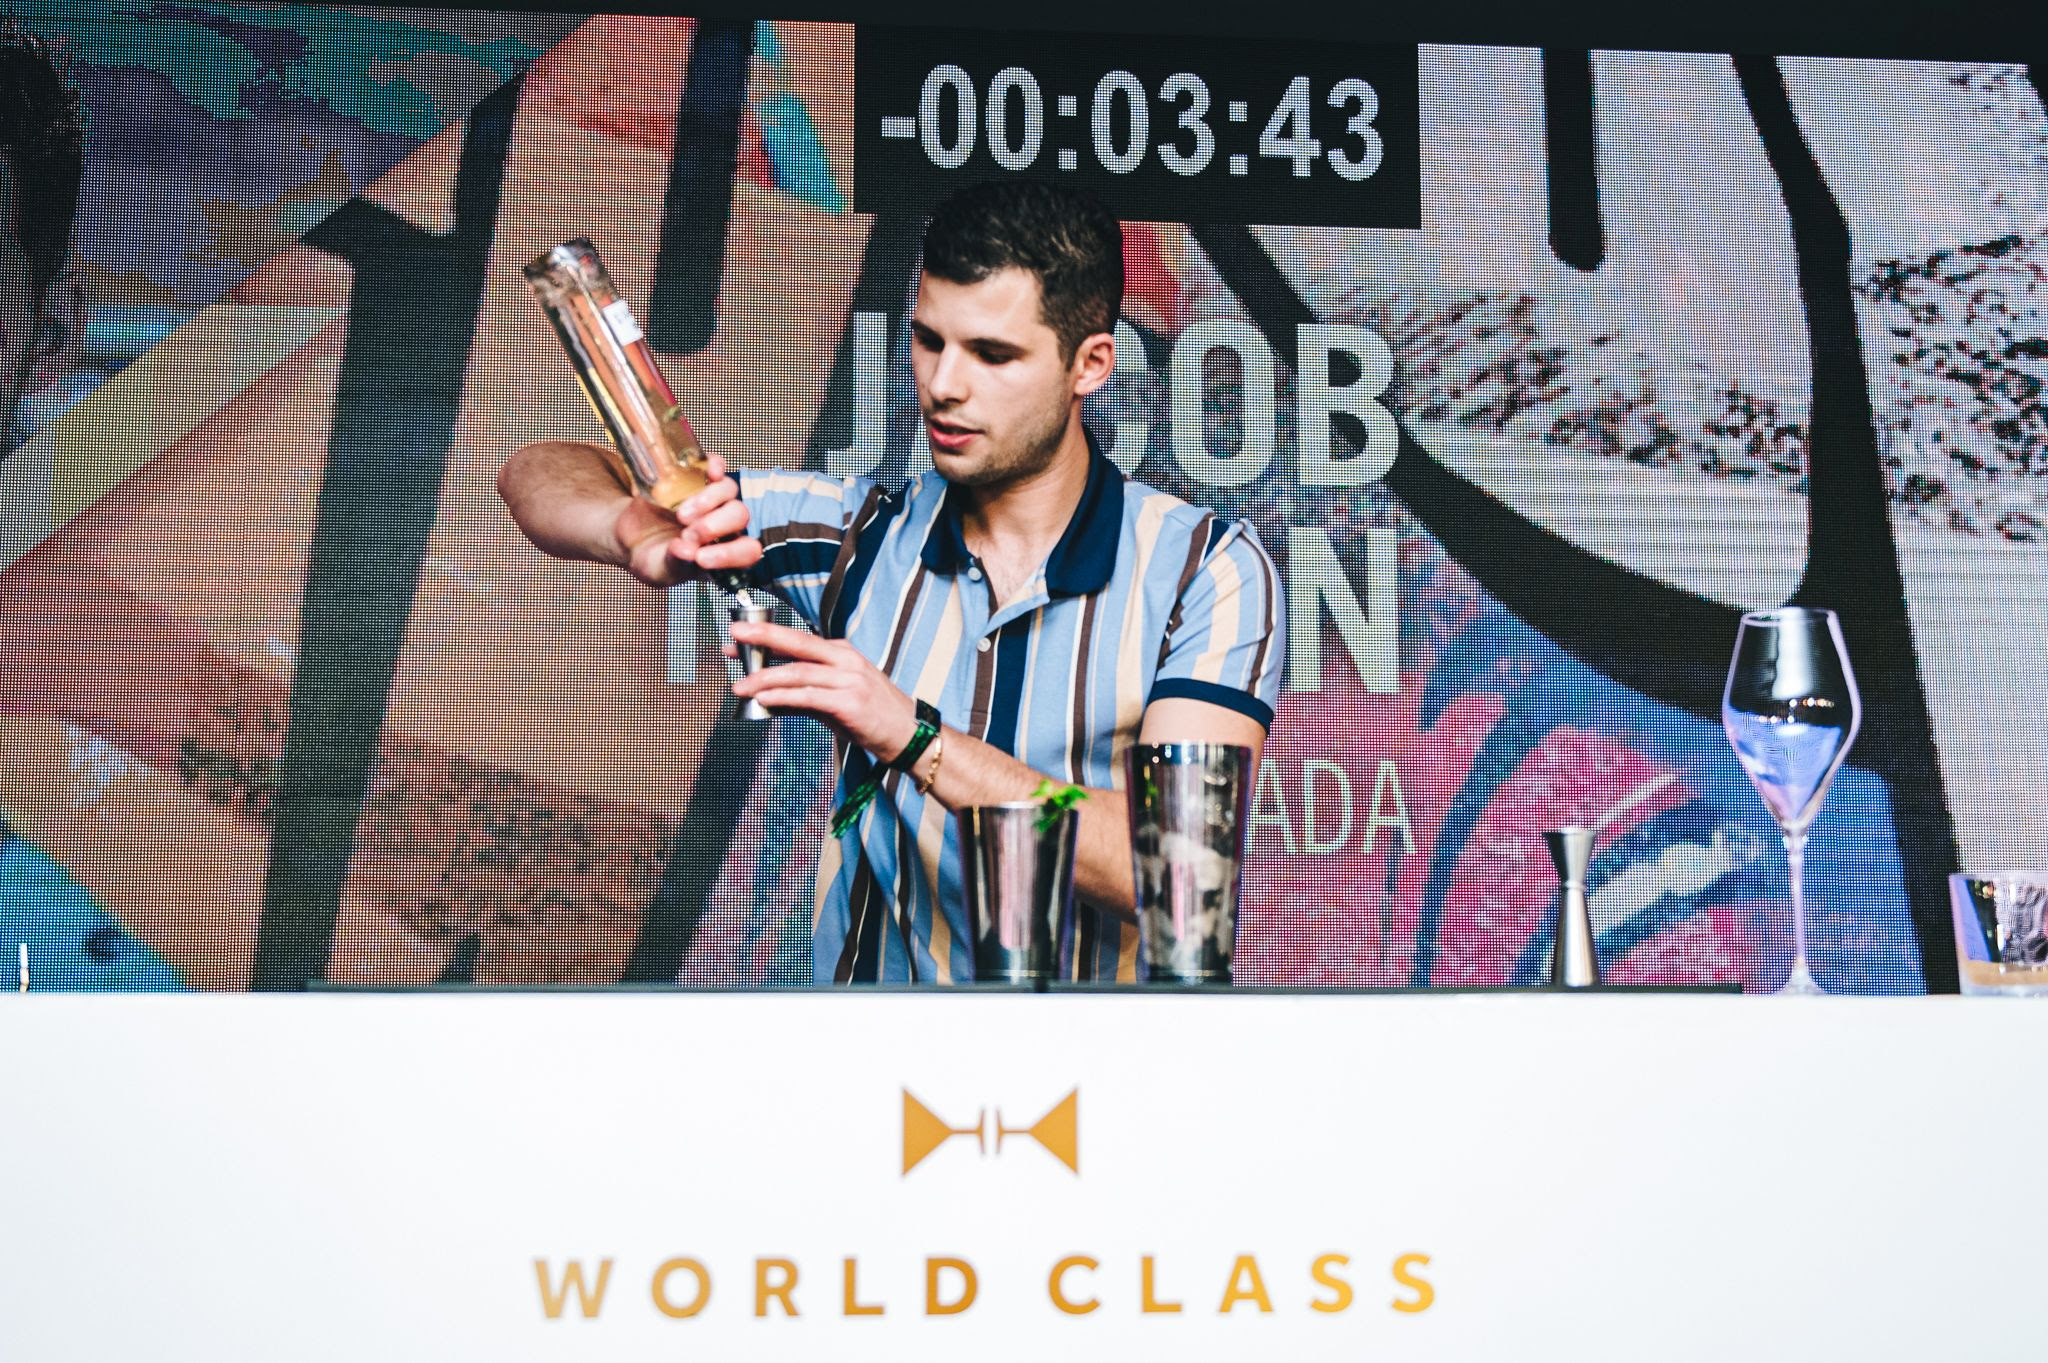 Jacob Martin takes on the Speed round during the World Class Global Bartender of the Year competition in São Paulo.